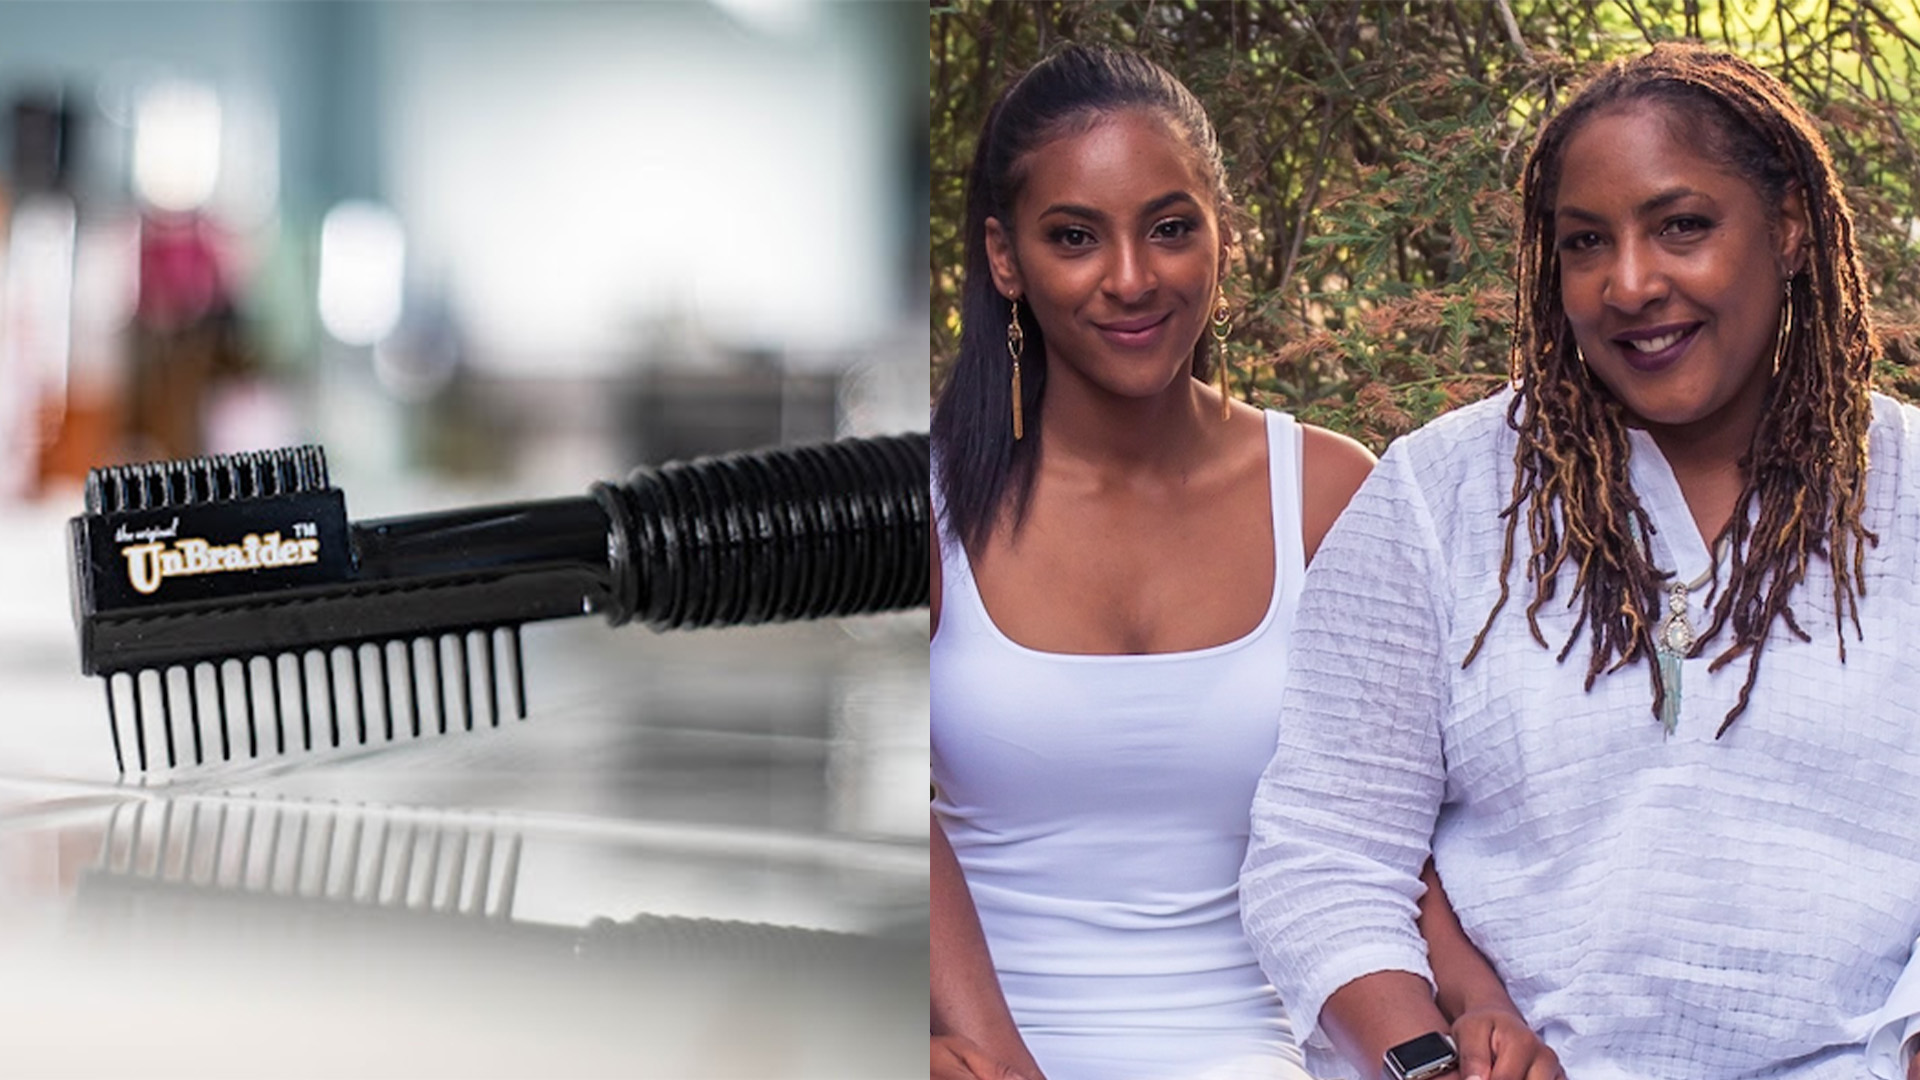 Mother-Daughter Duo Relaunches Unbraiding Tool Engineered To Take Down Up To 8 Braids Simultaneously